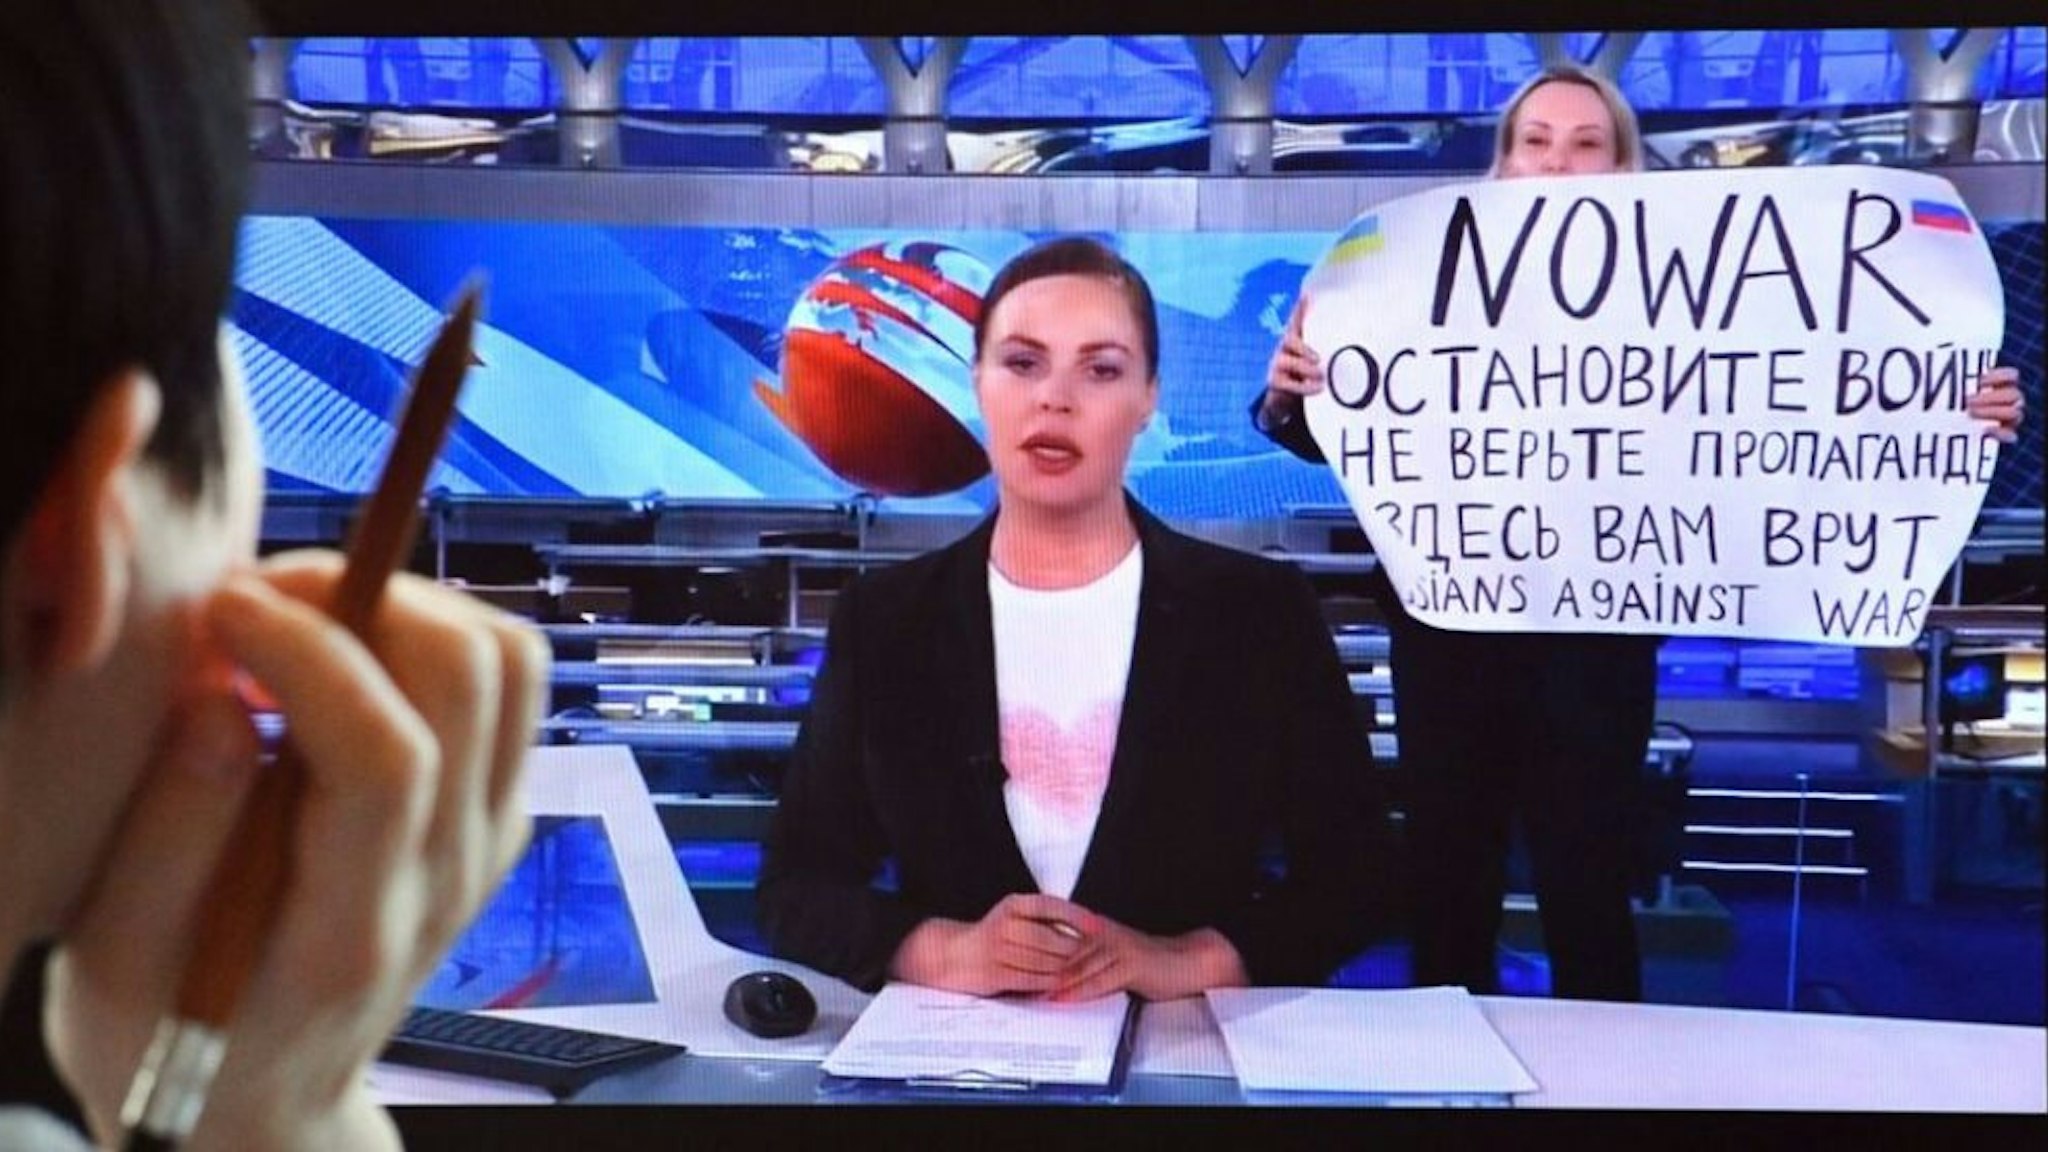 A woman looks at a computer screen watching a dissenting Russian Channel One employee entering Ostankino on-air TV studio during Russia's most-watched evening news broadcast, holding up a poster which reads as "No War" and condemning Moscow's military action in Ukraine in Moscow on March 15, 2022. - As a news anchor Yekaterina Andreyeva launched into an item about relations with Belarus, Marina Ovsyannikova, who wore a dark formal suit, burst into view, holding up a hand-written poster saying "No War" in English.